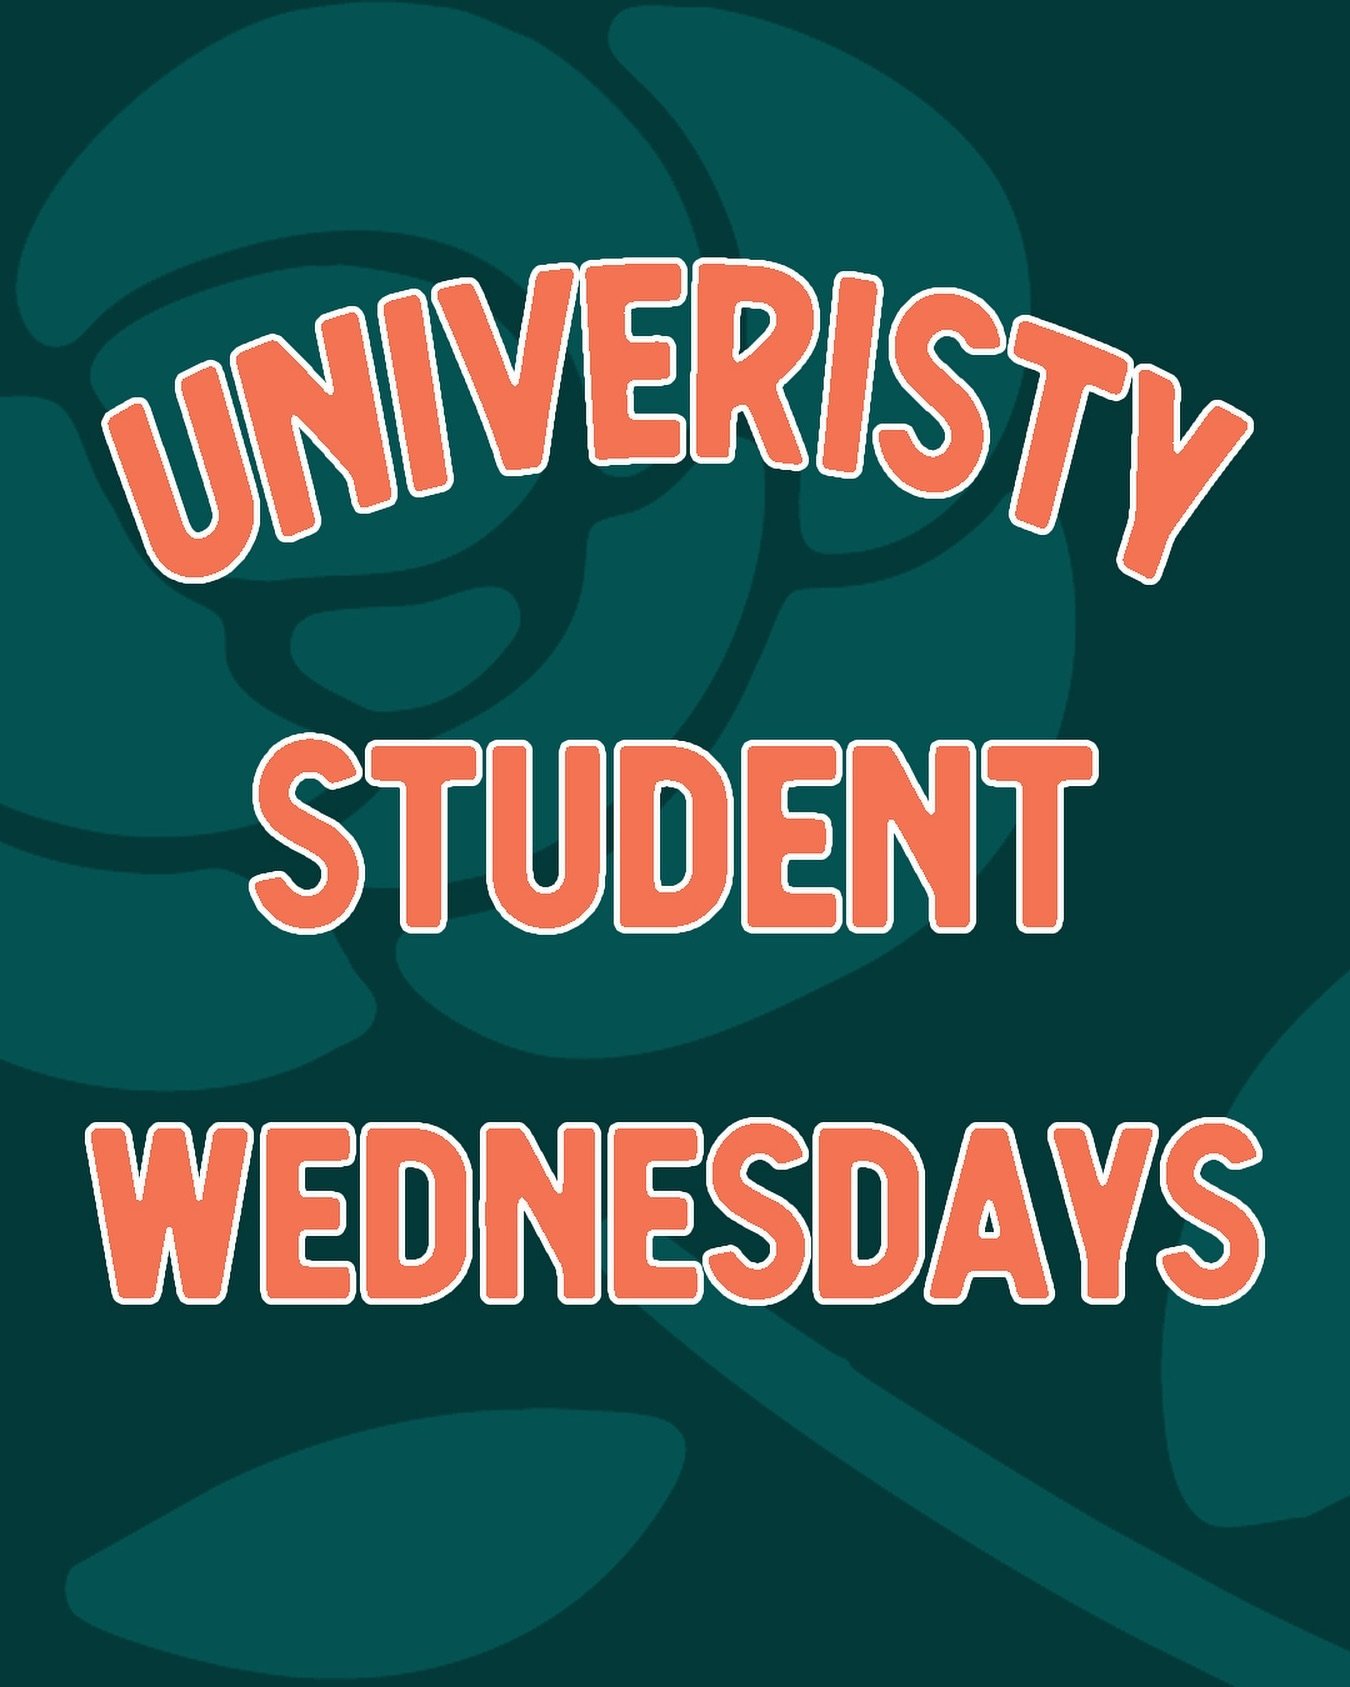 Hump days just got even better&hellip; 🐫👌

Flash your student ID for savings on services at Soulsbys on Wednesdays!

(Please note, our Wednesday special is not applicable for bookings with Kyle.)